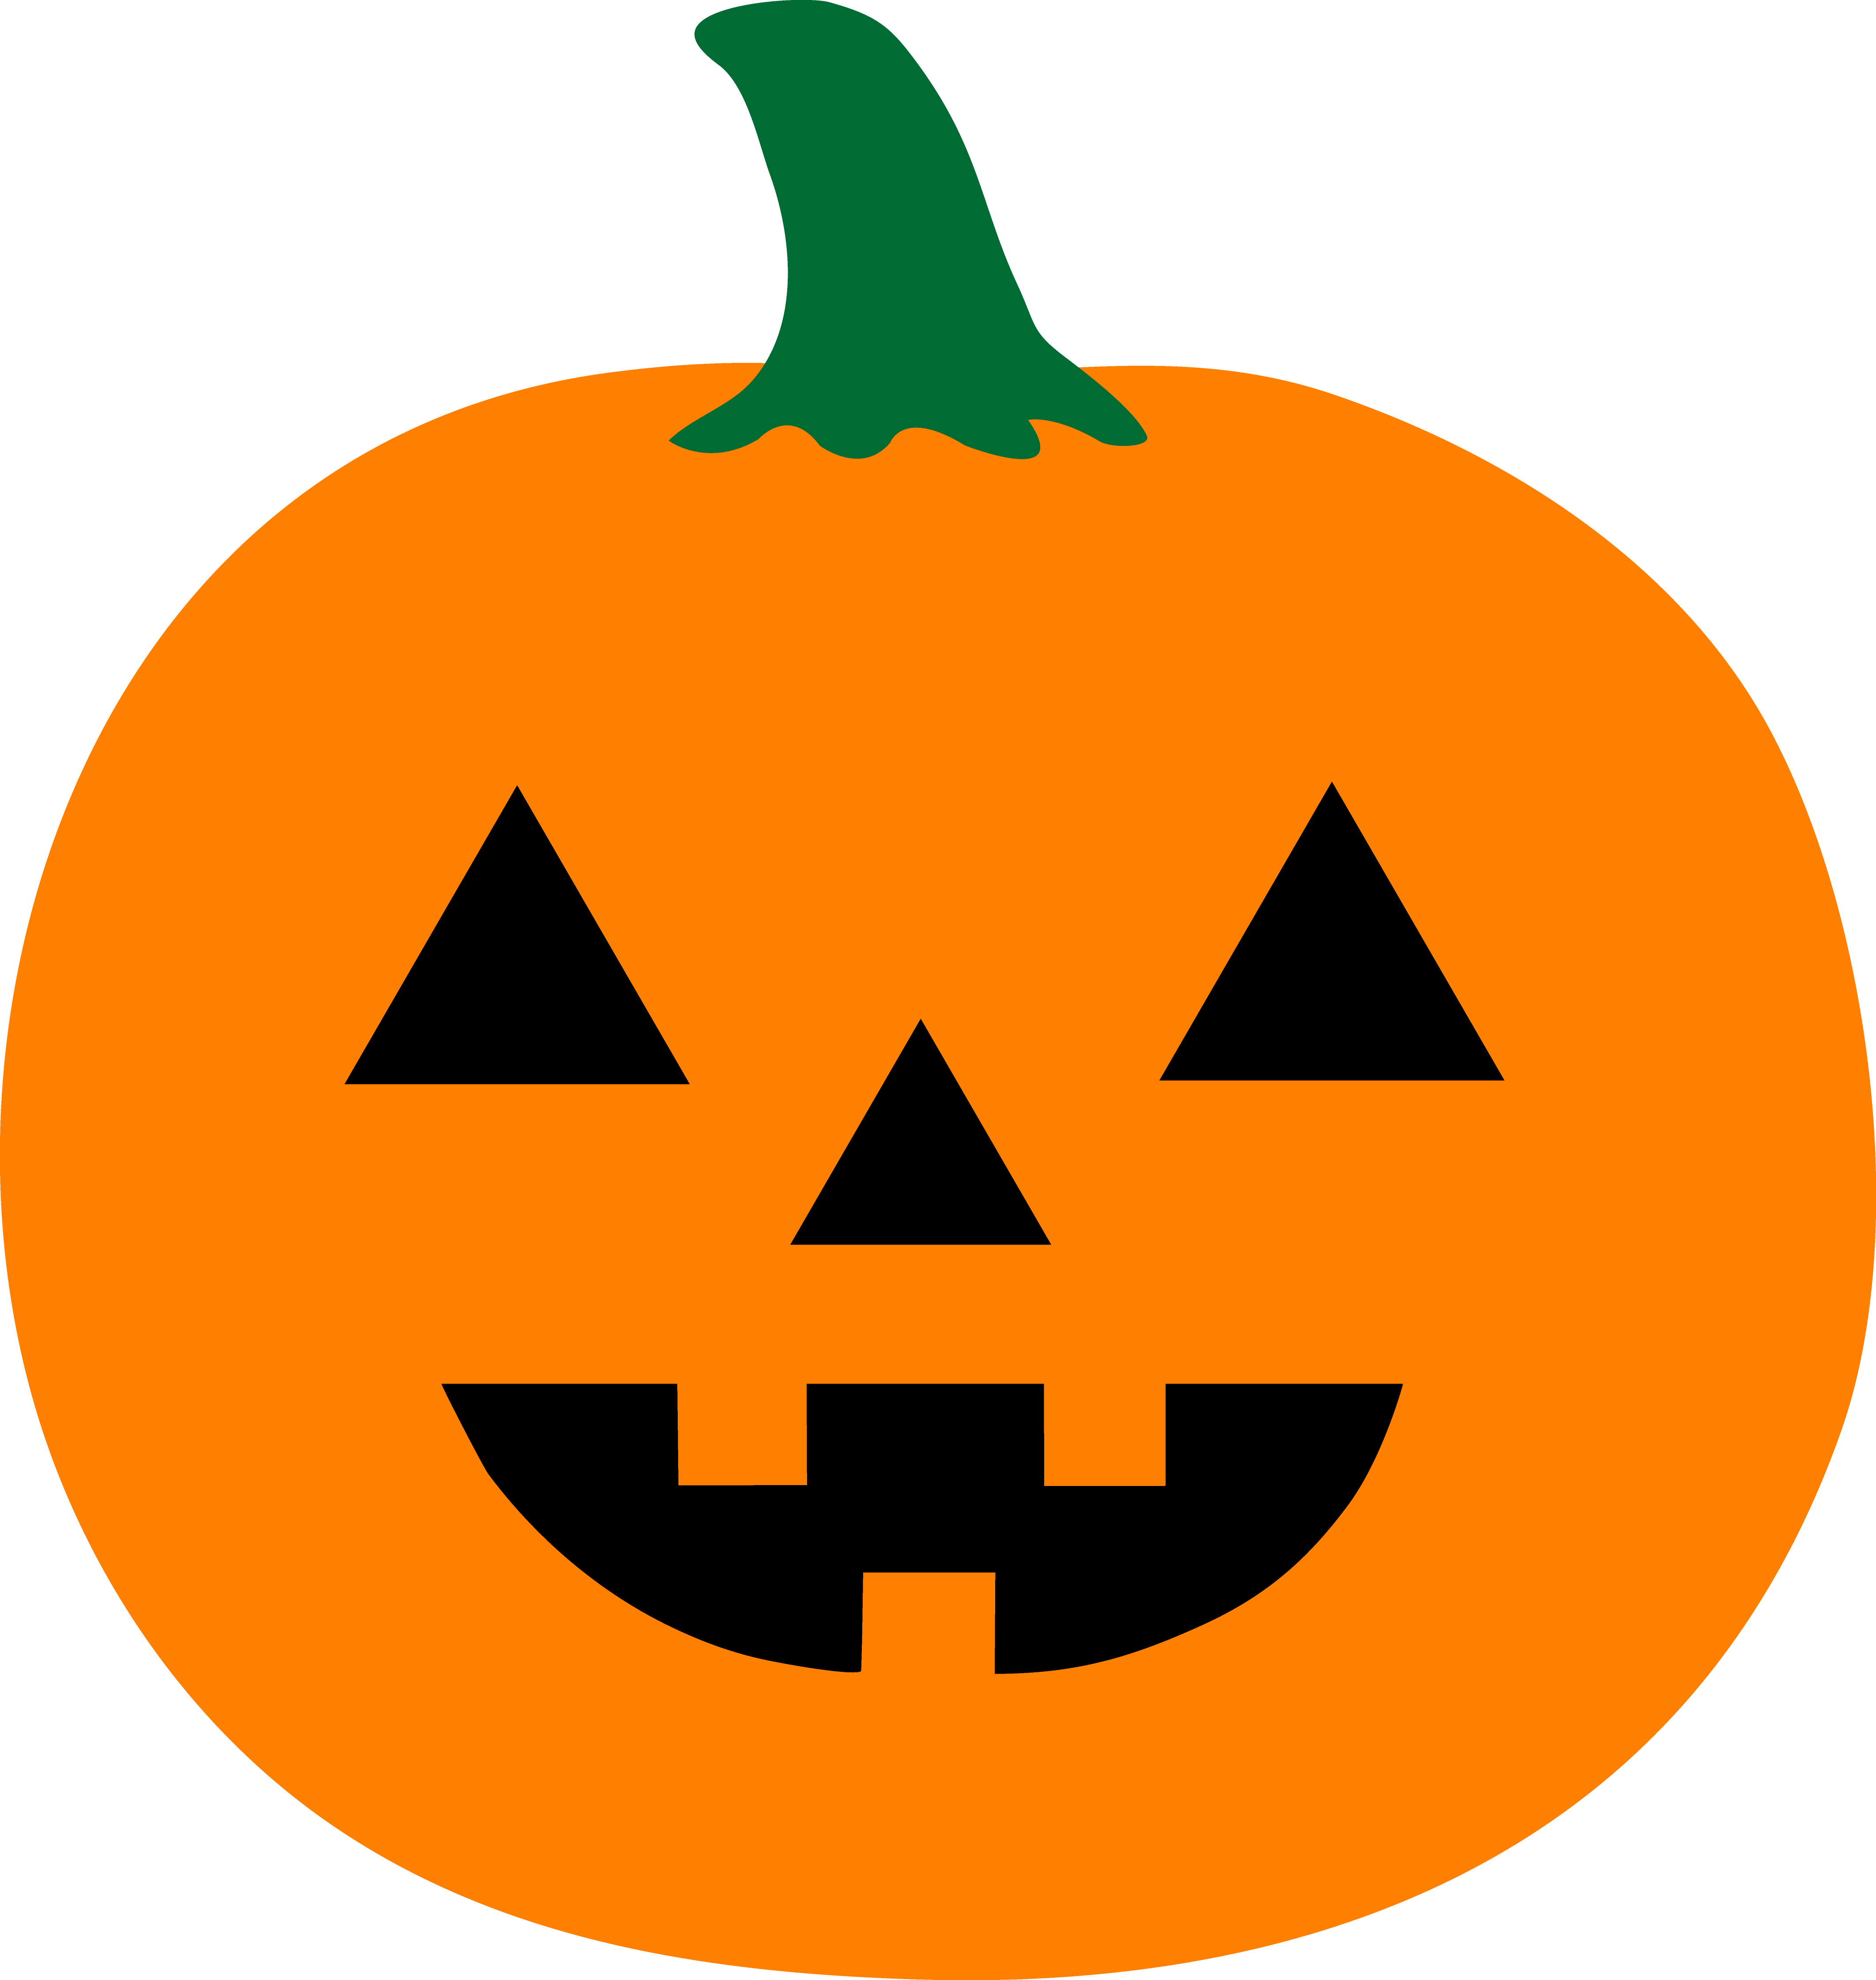 Halloween Pumpkins Clip Art Free | Clipart library - Free Clipart Images